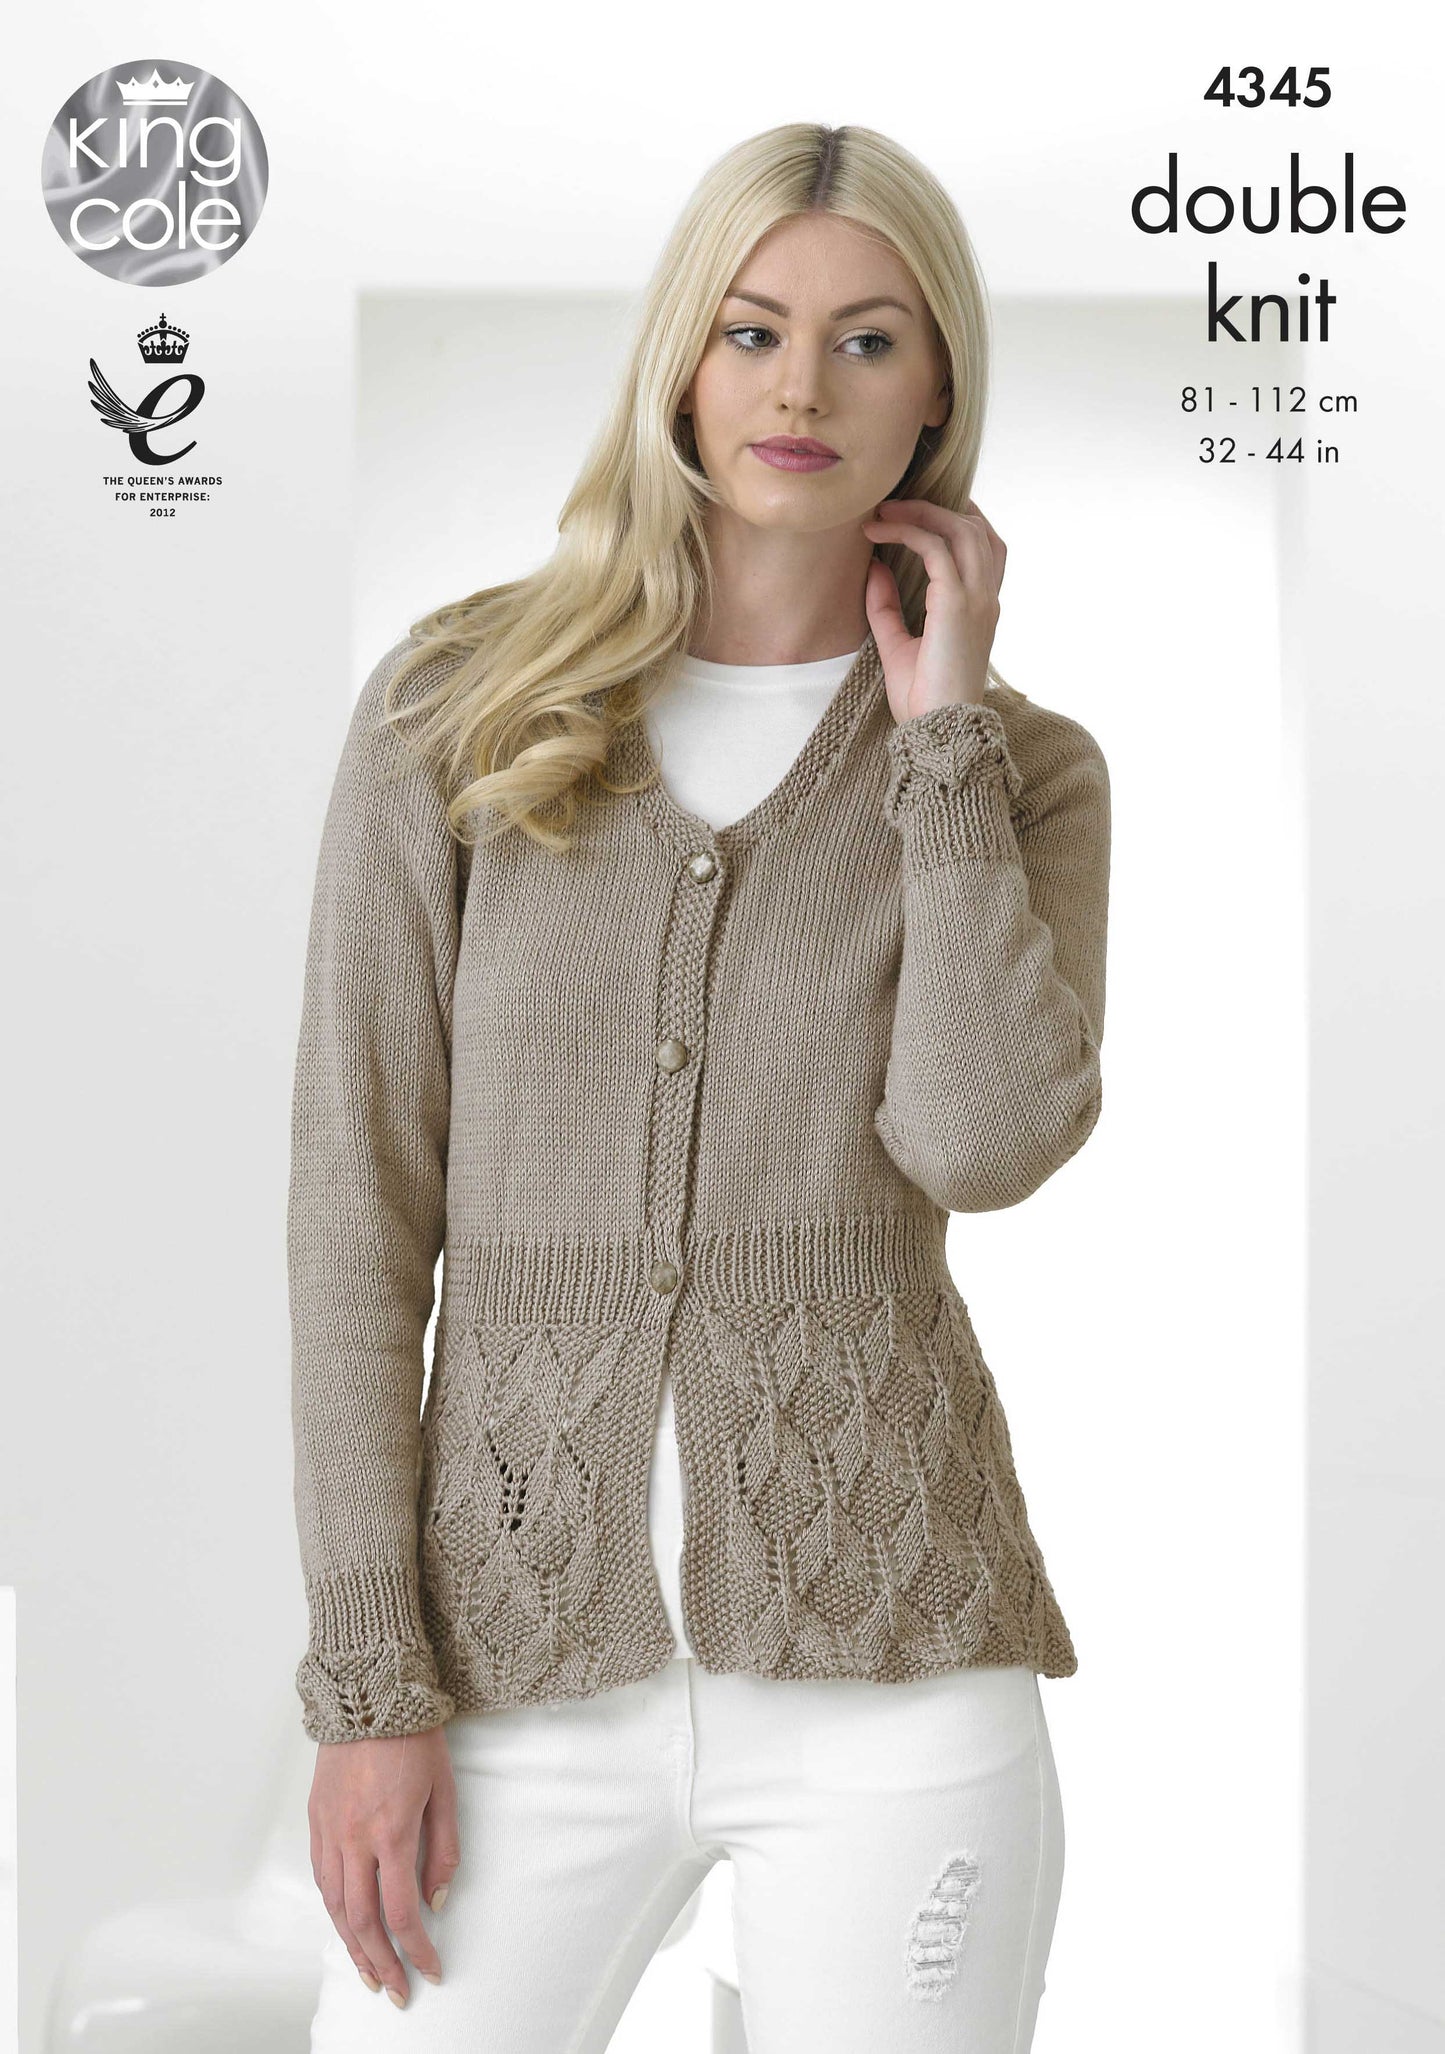 Knitting Pattern 4345 - Cardigans Knitted with Cottonsoft DK